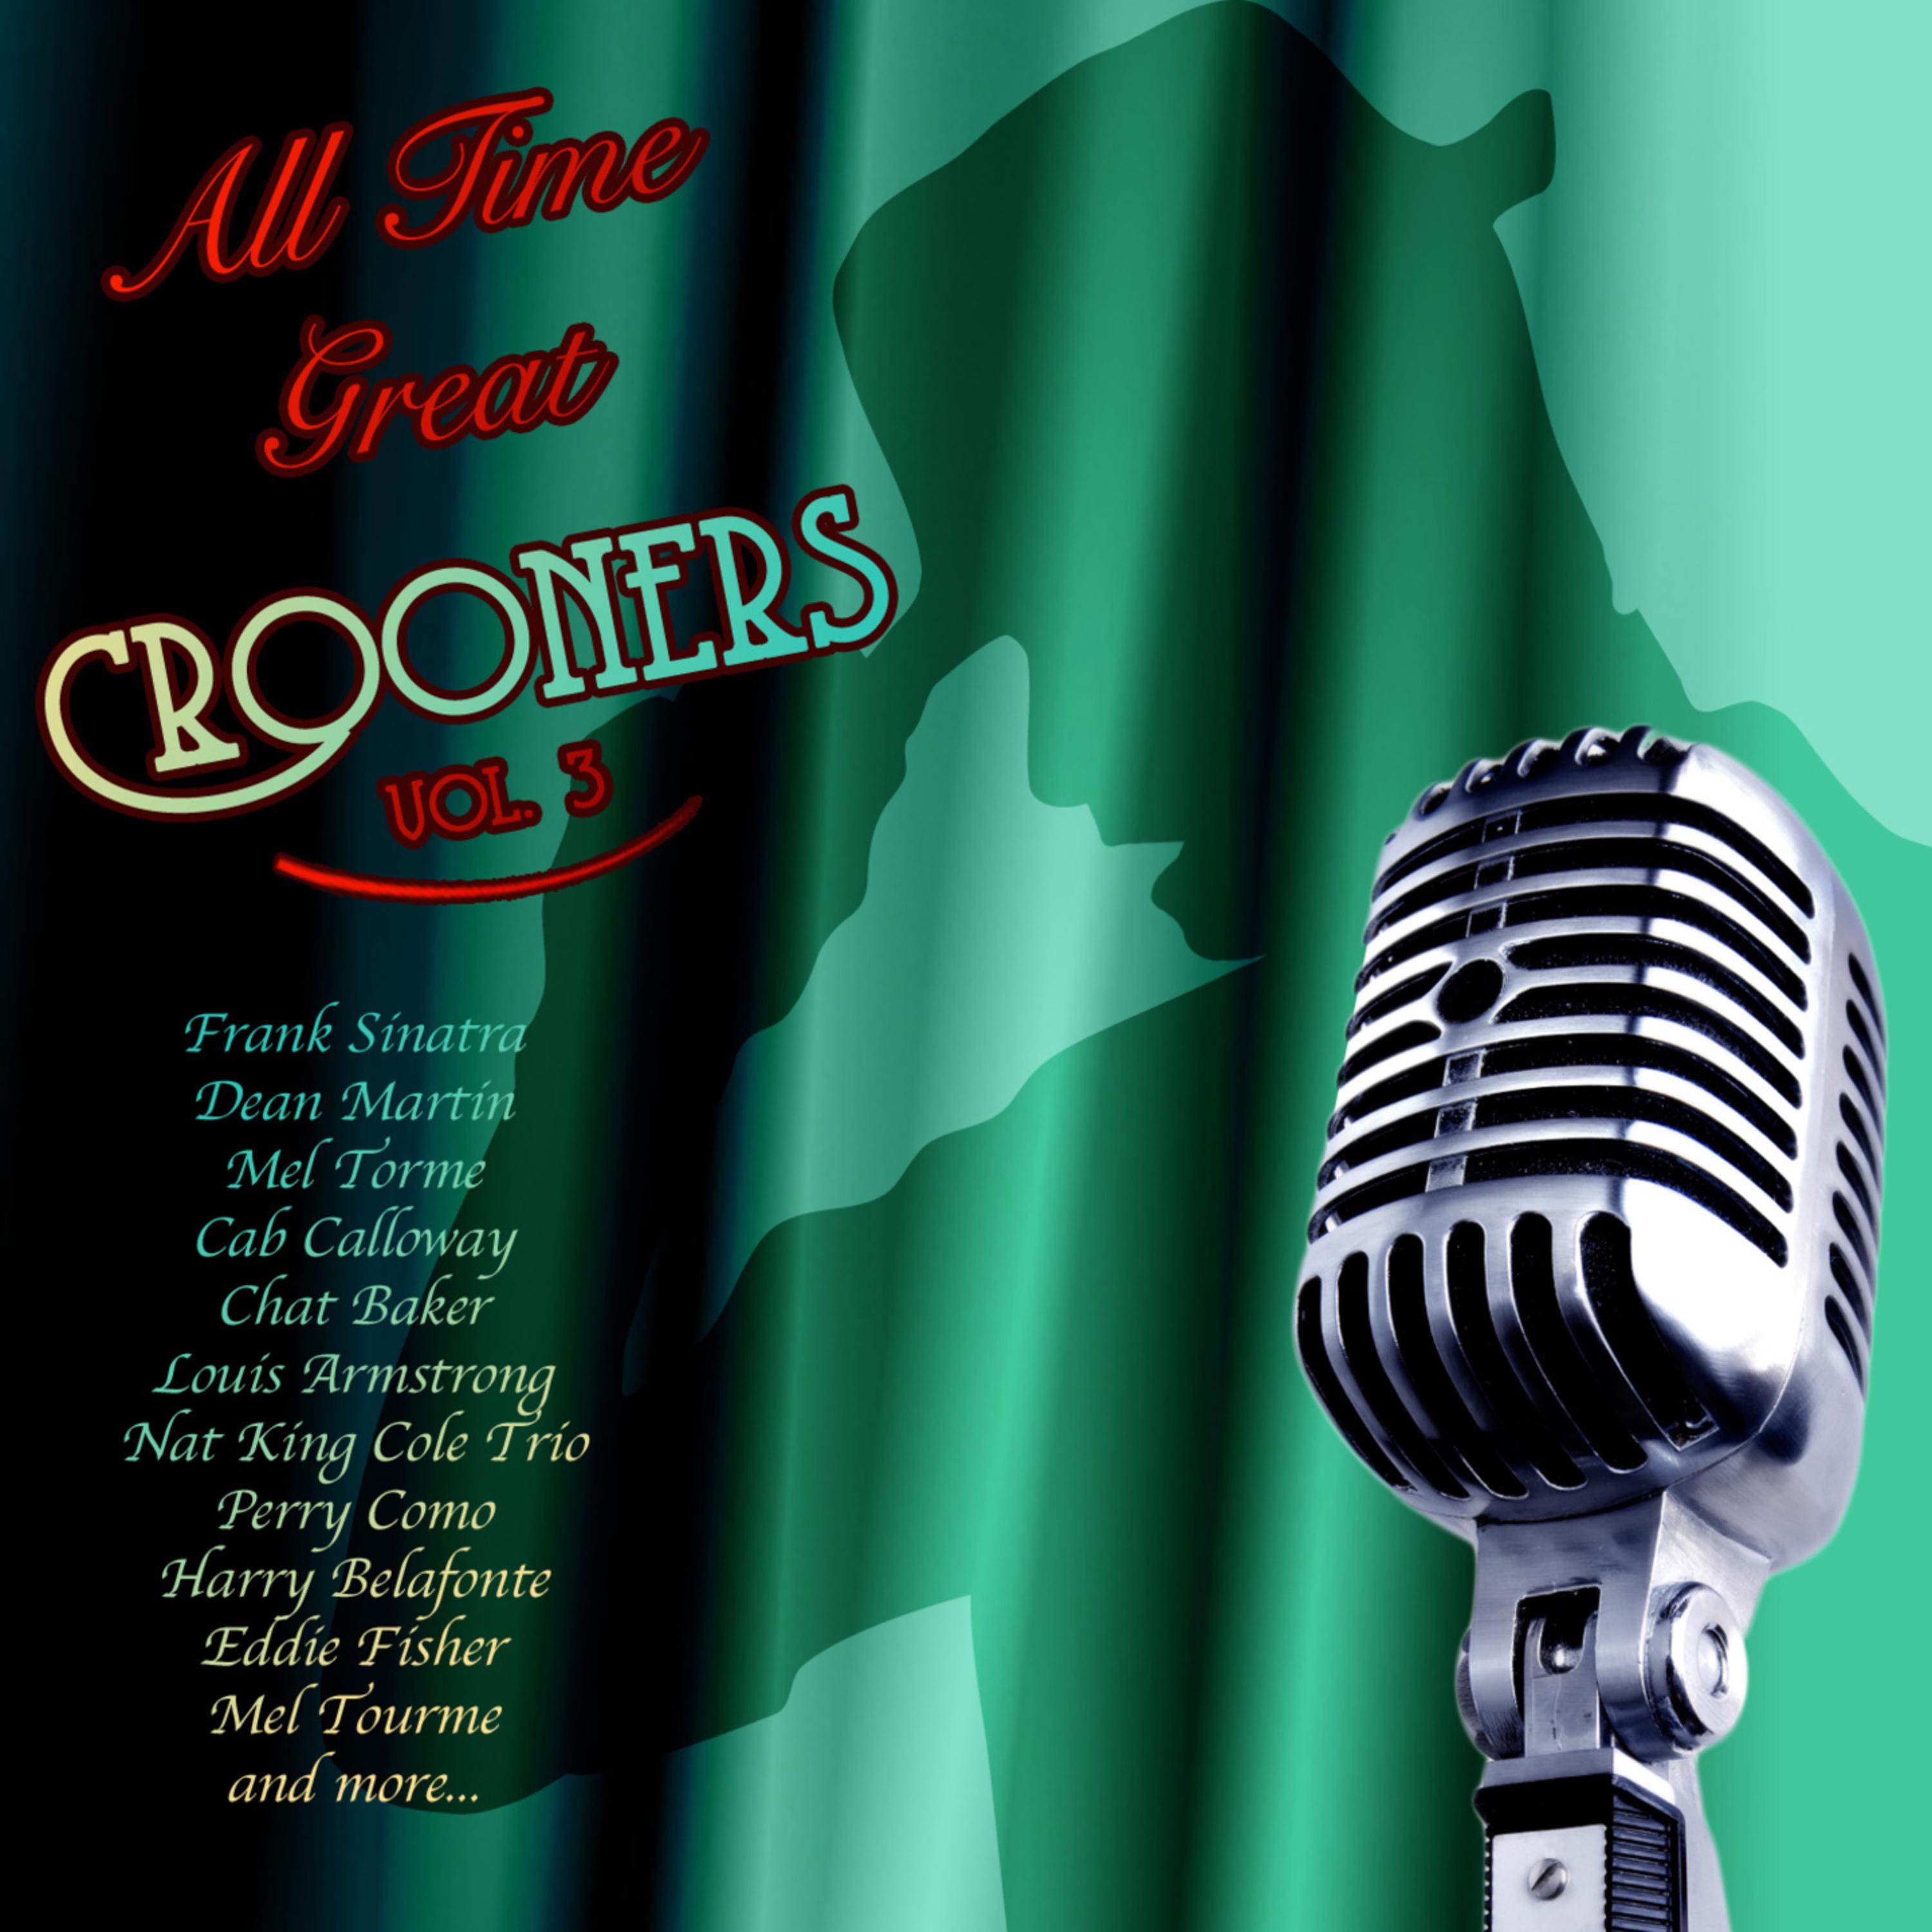 All Time Great Crooners Vol 3